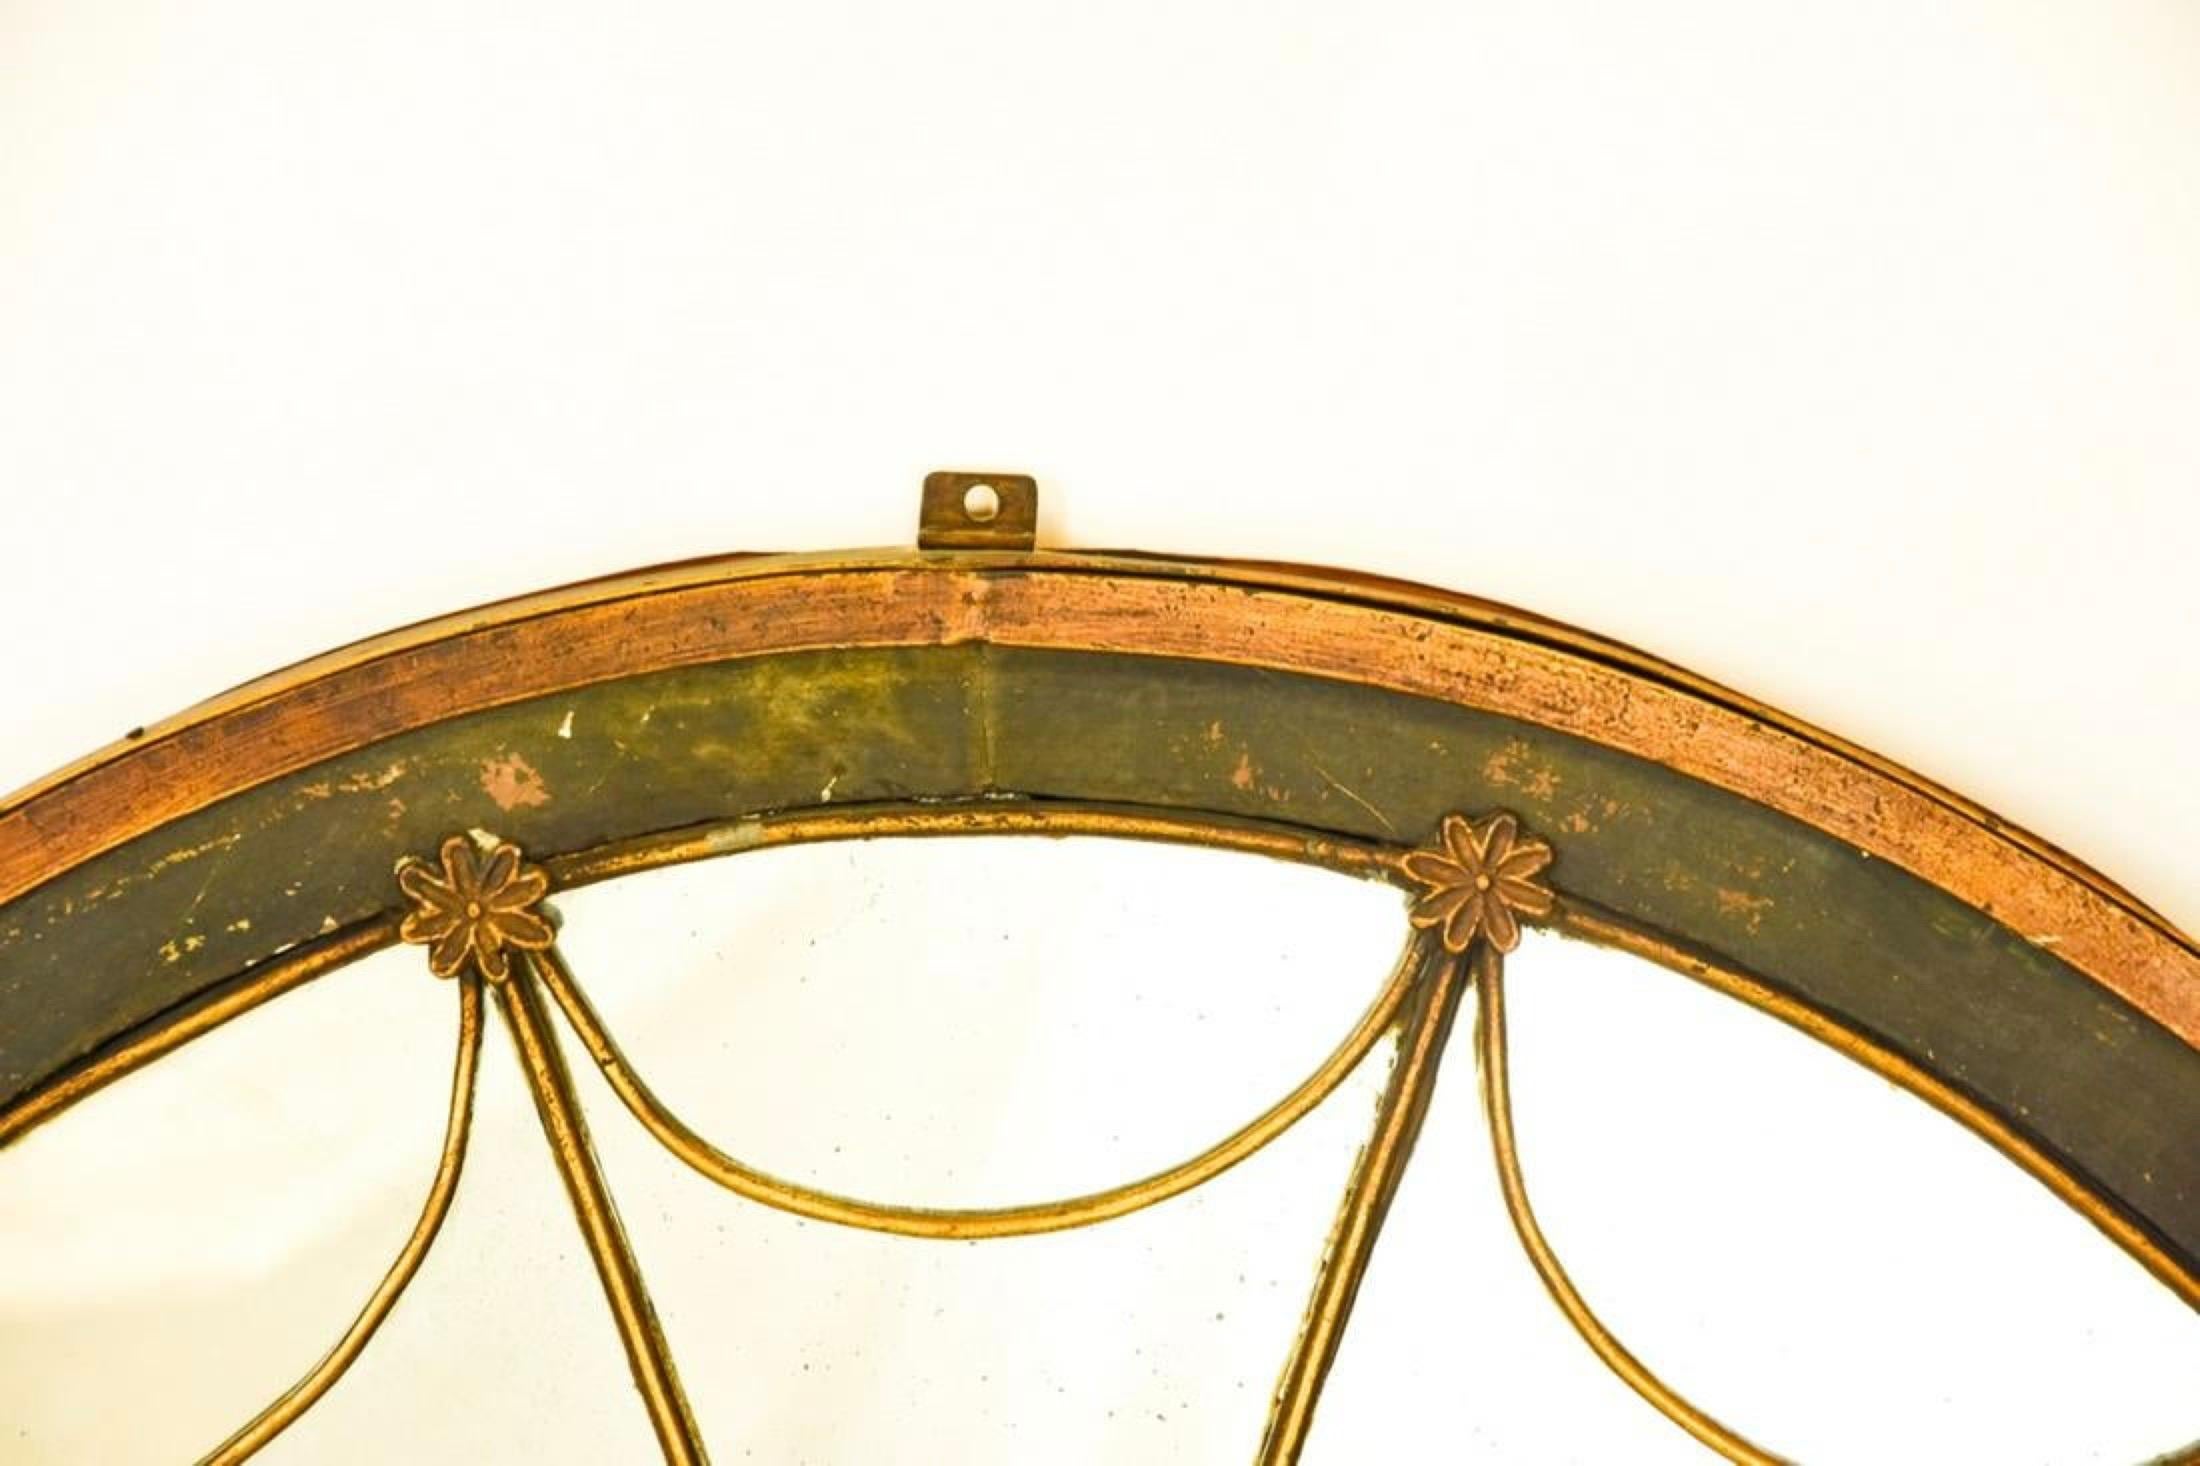 Rare stylish antique Empire style gilded iron frame mantle mirror with arched top and paned detail. Great as mantel mirrors, fireplace mirror, console mirror, or trumeau mirror. Iron frame lends itself for indoor or outdoor use.  Add style and